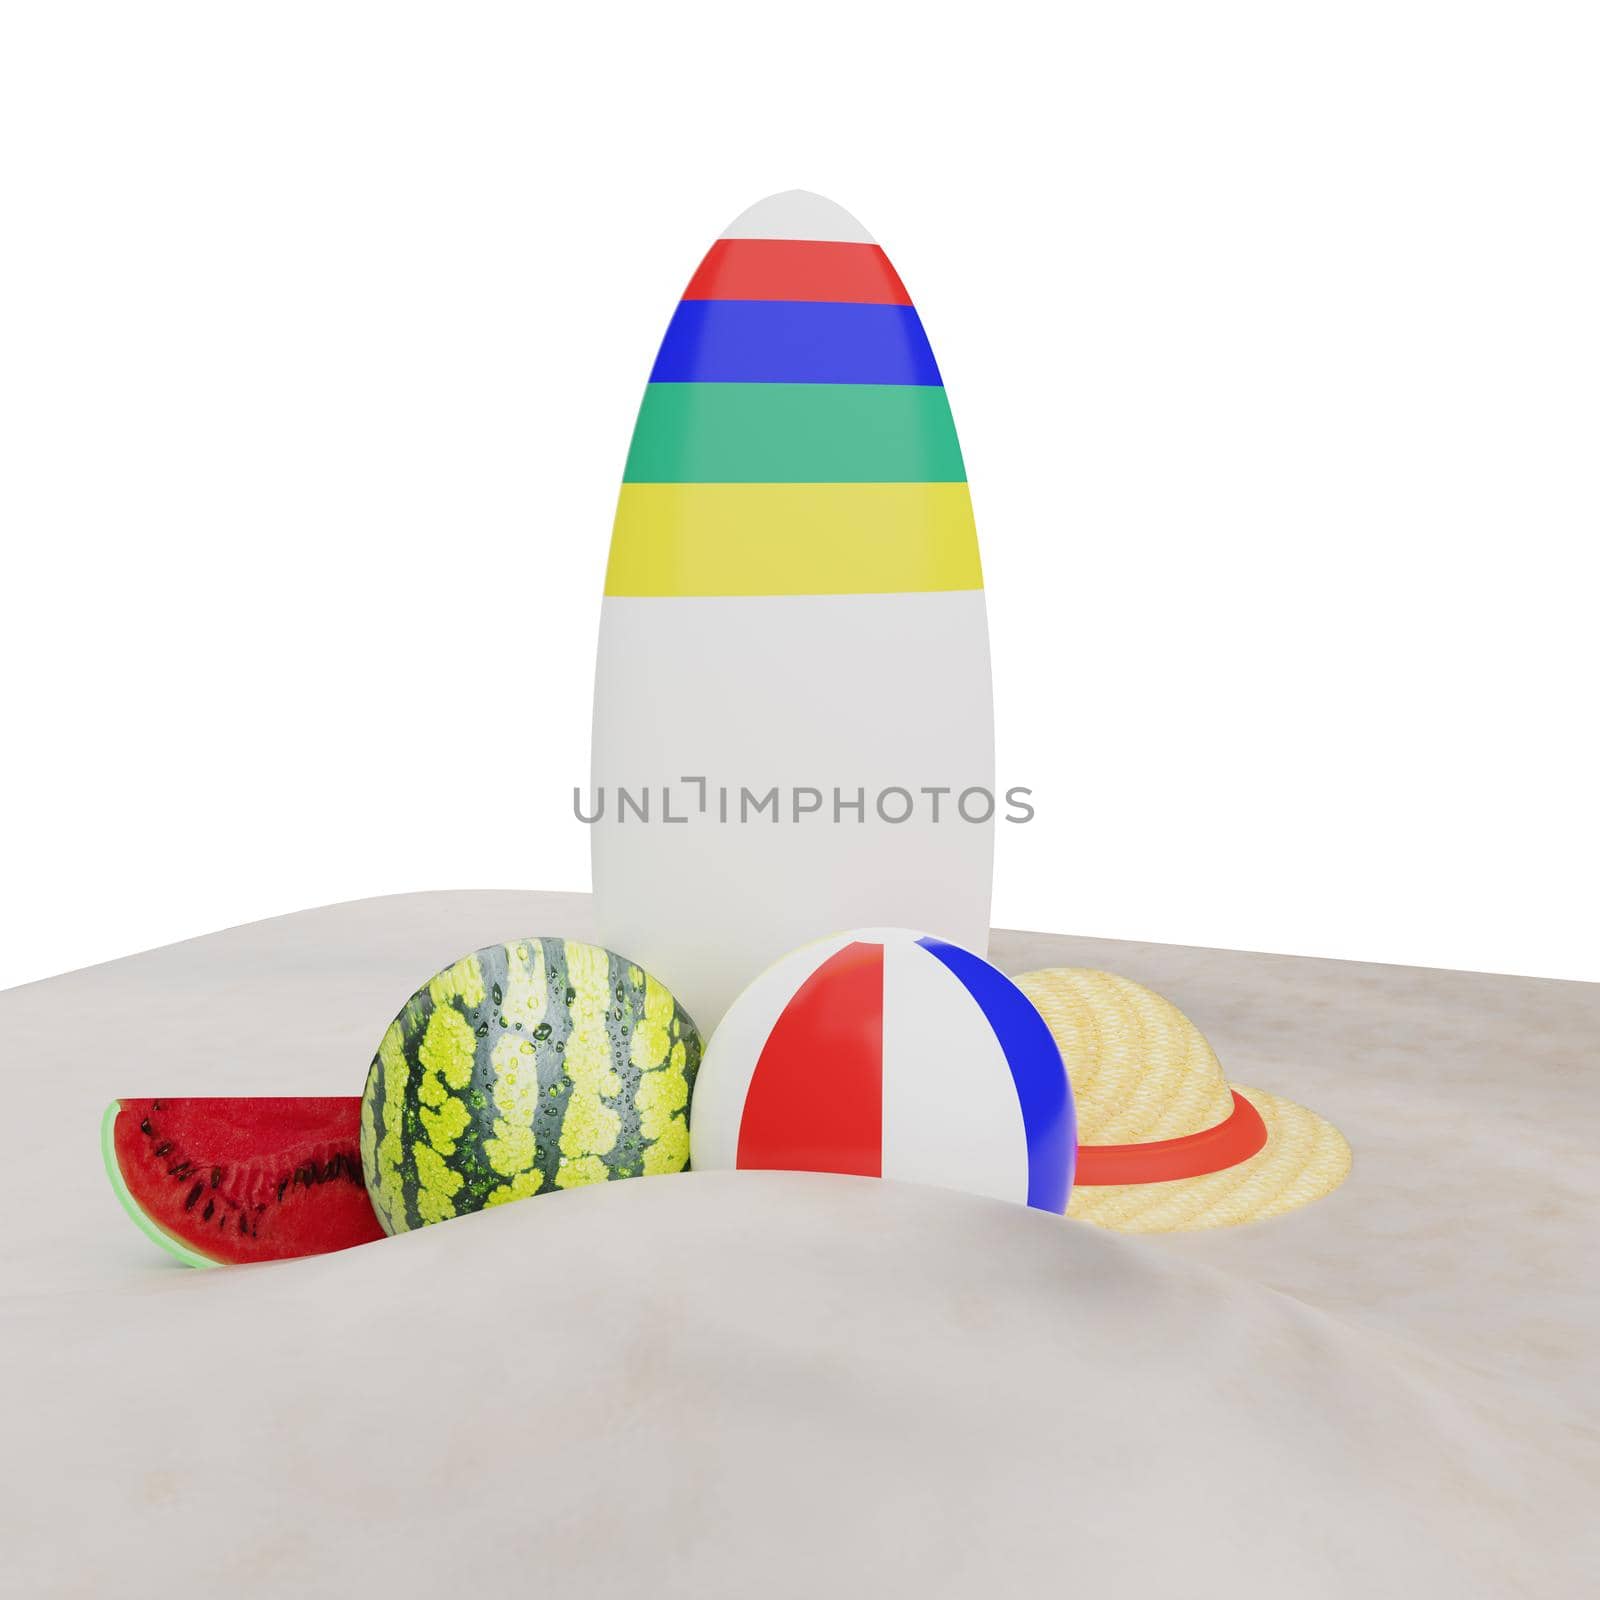 3d rendering summer concept isolated